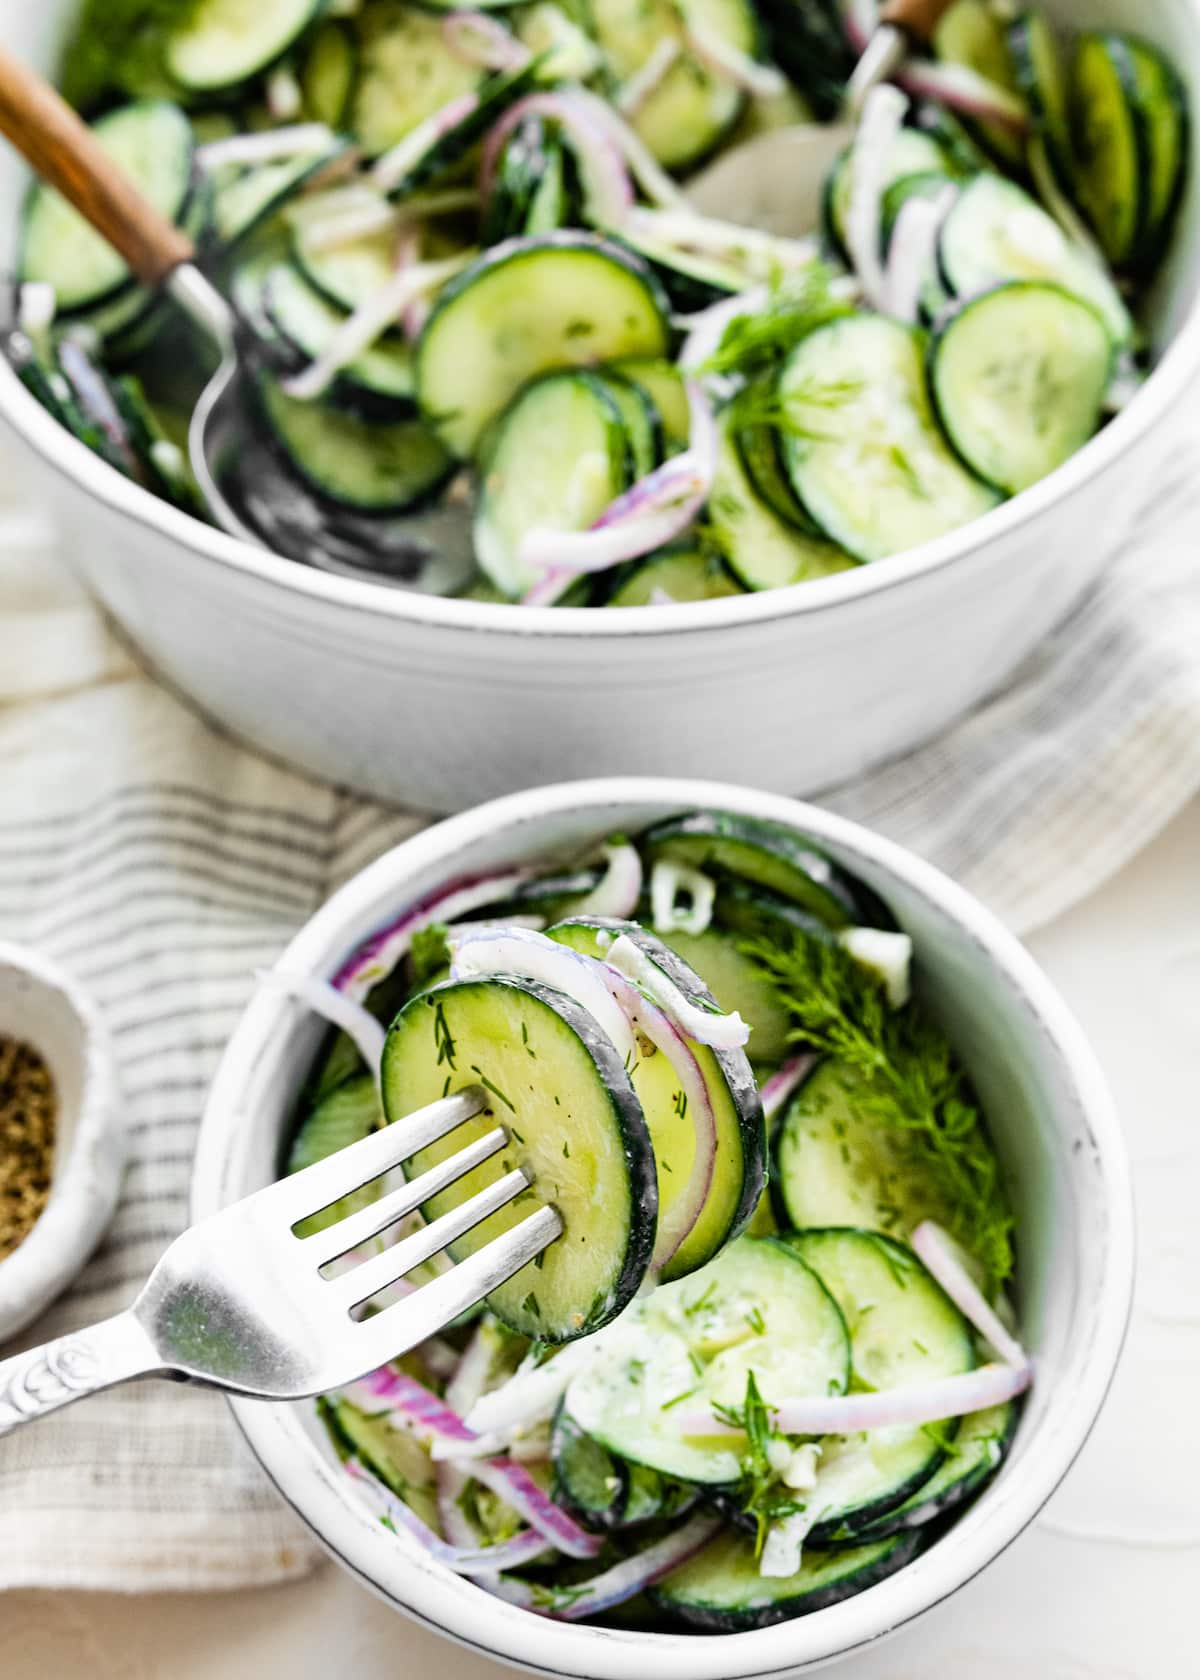 A fork taking a bite-size portion of cucumber salad from a bowl.